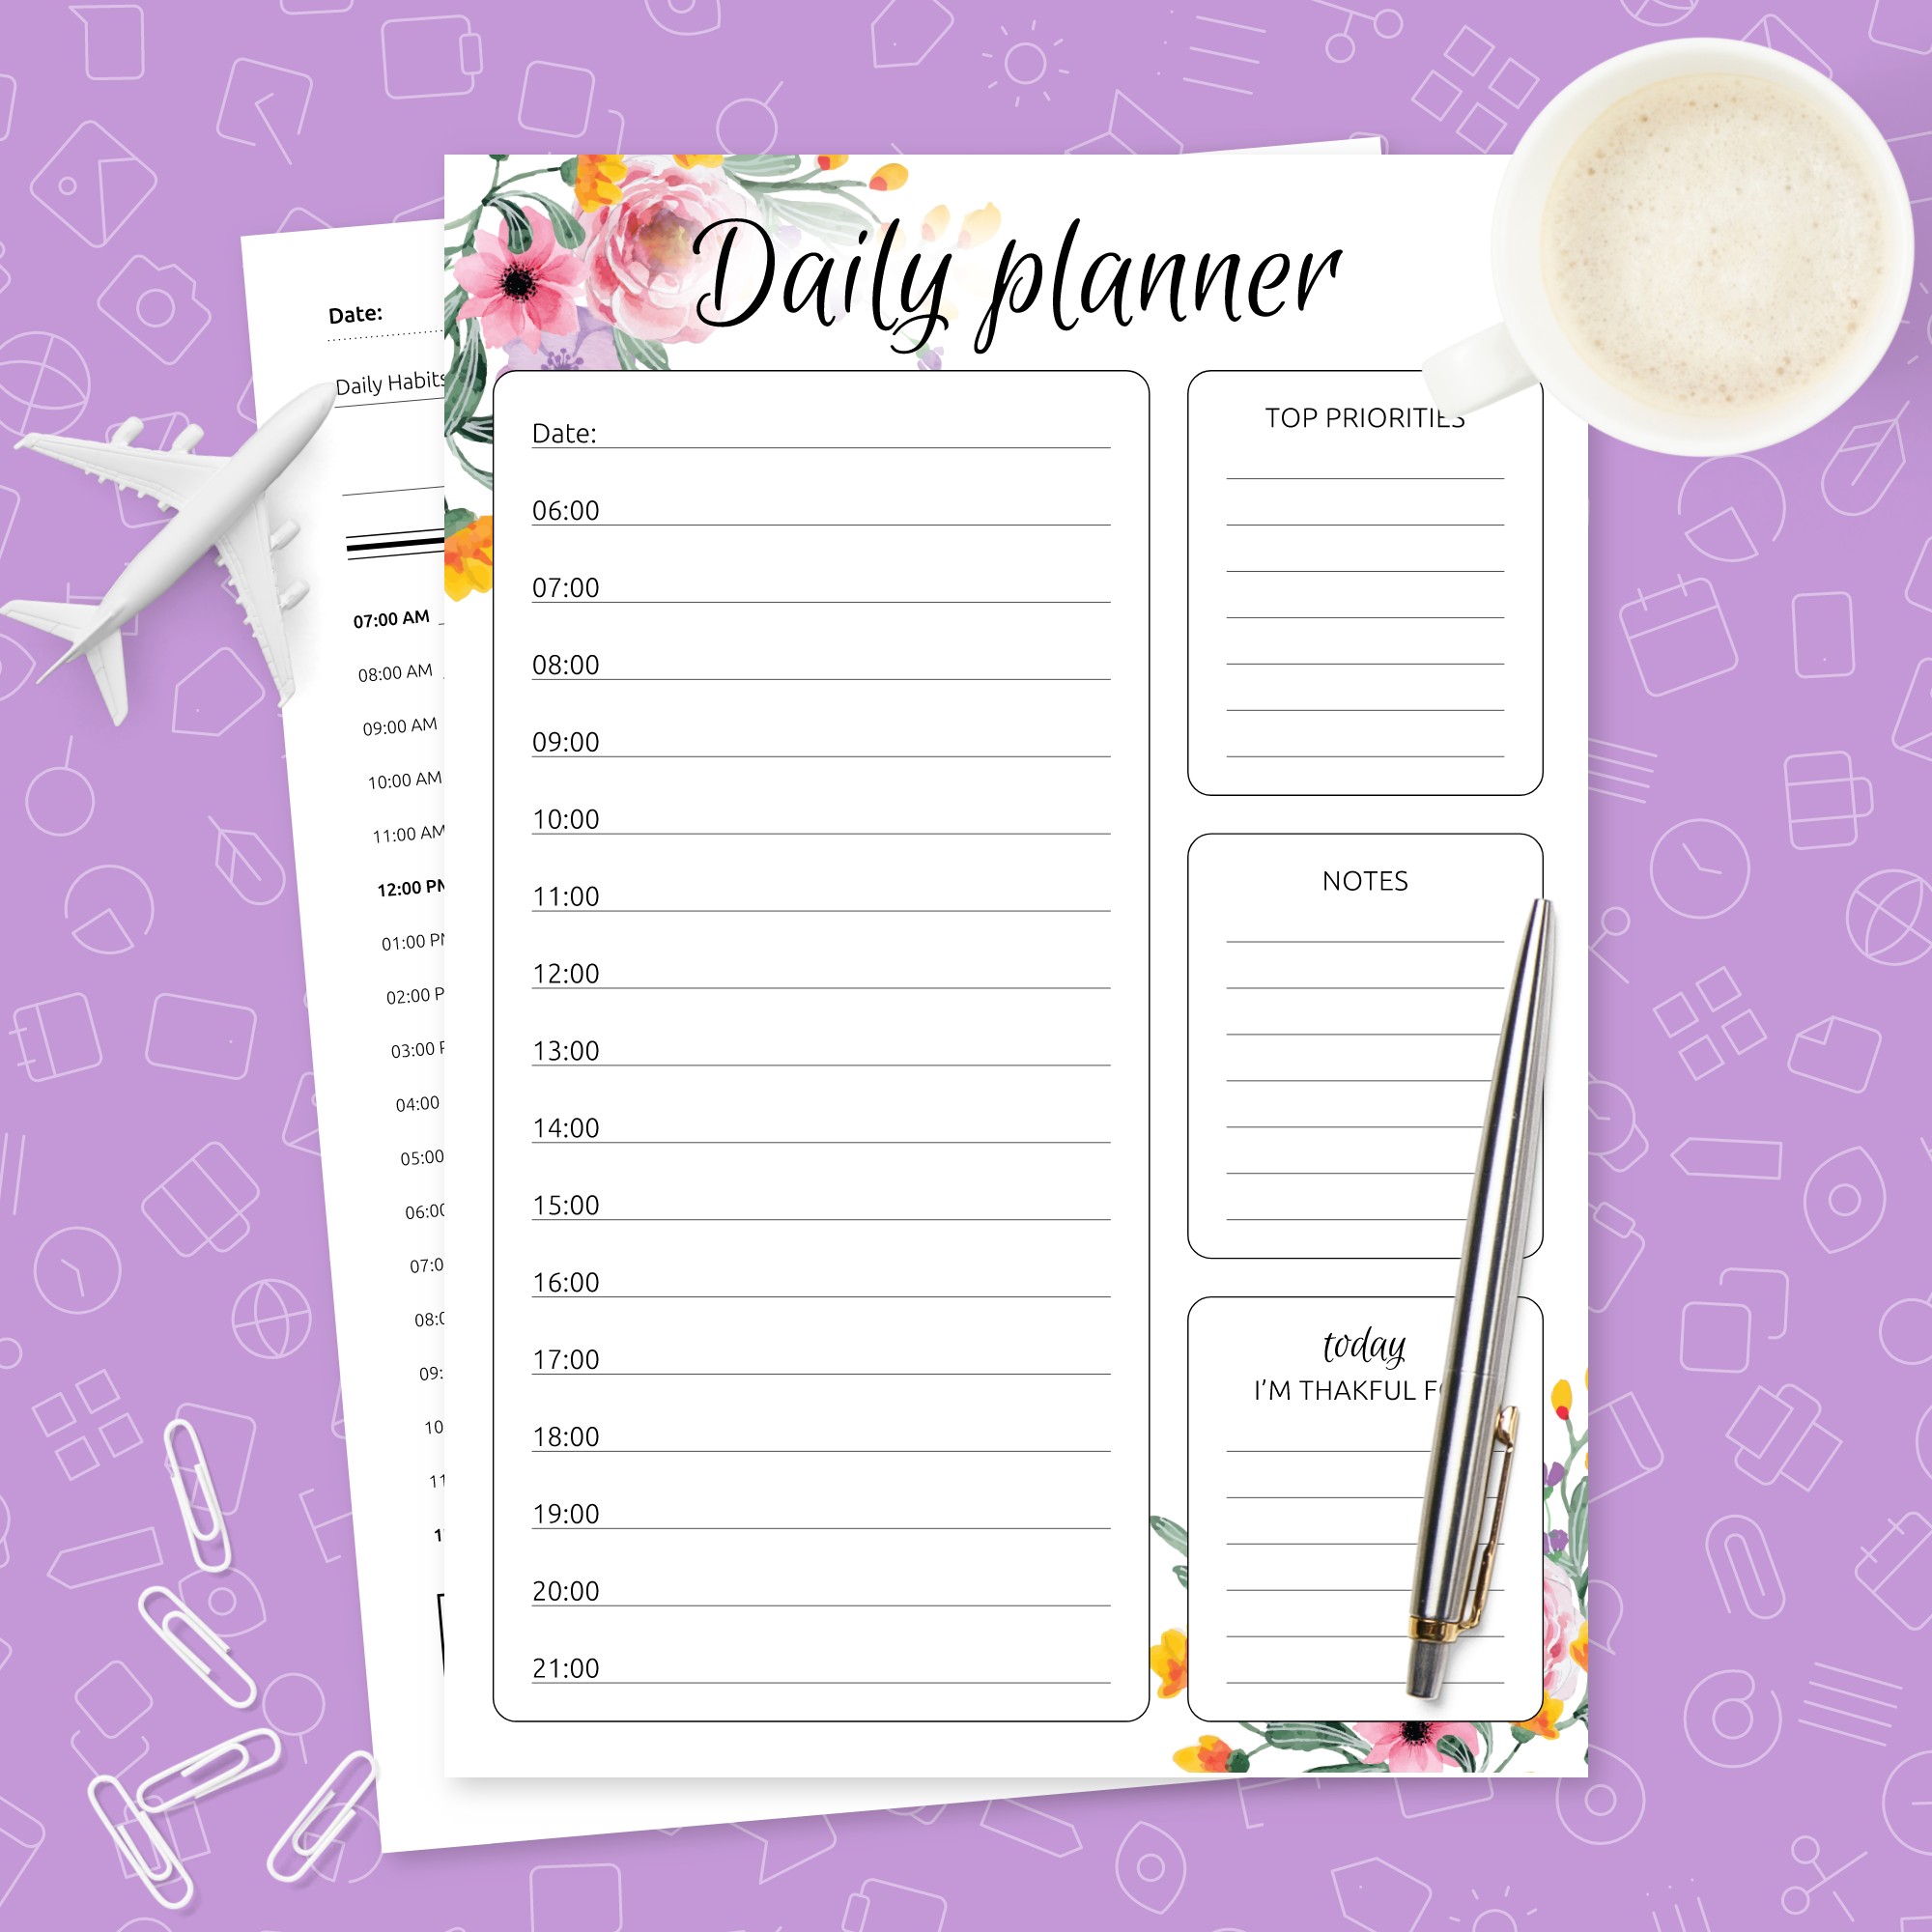 Daily Planner Templates 5 in 1 Bundle Template - Printable PDF